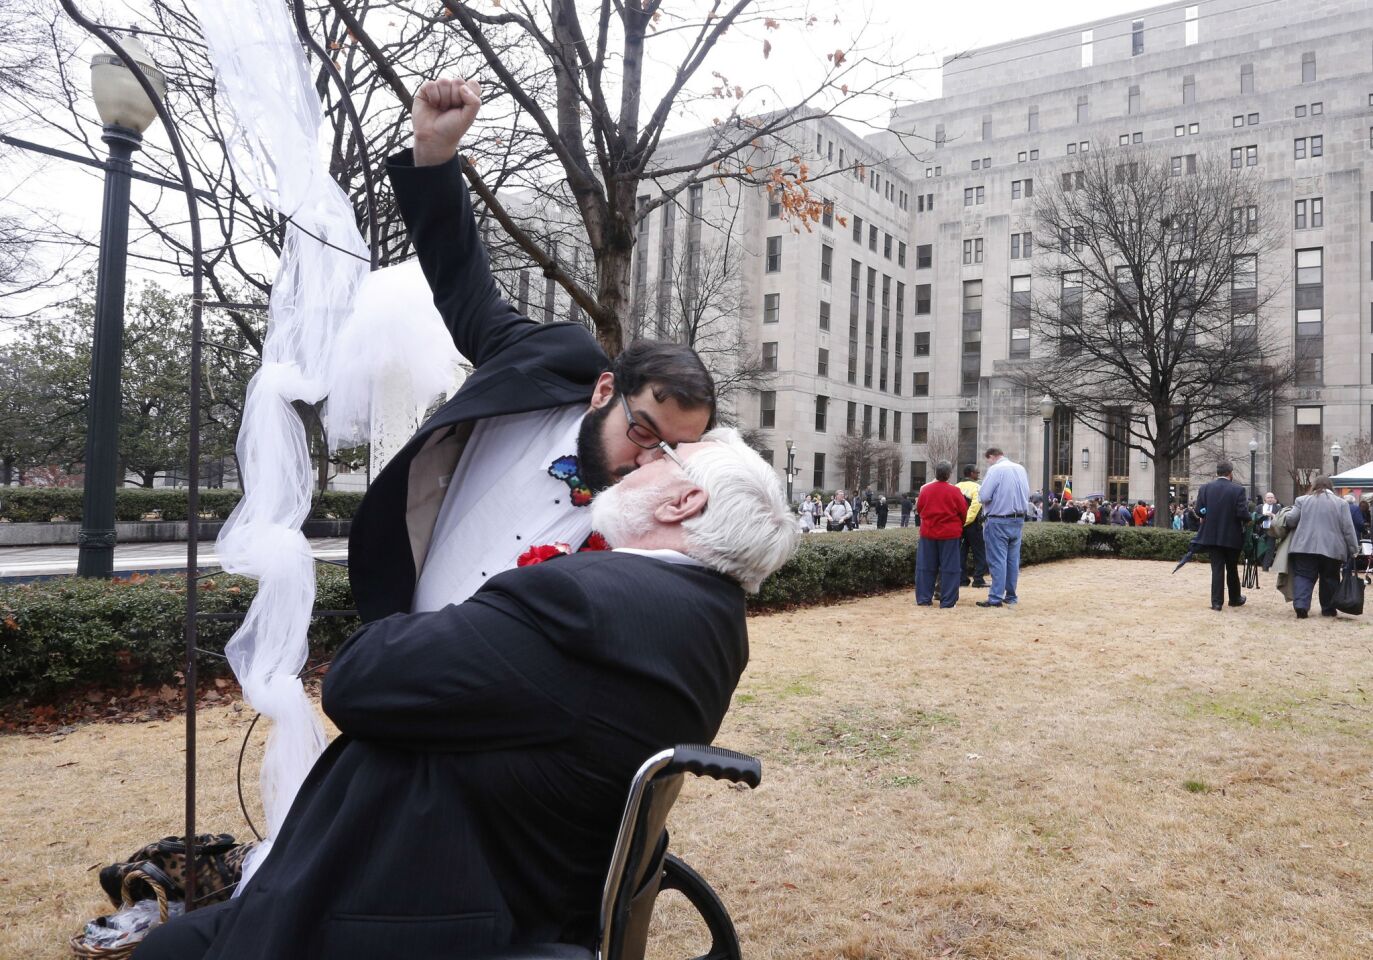 Eli Wright raises his fist as he kisses his spouse, Don Wright, in Linn Park after their marriage in Birmingham, Ala.